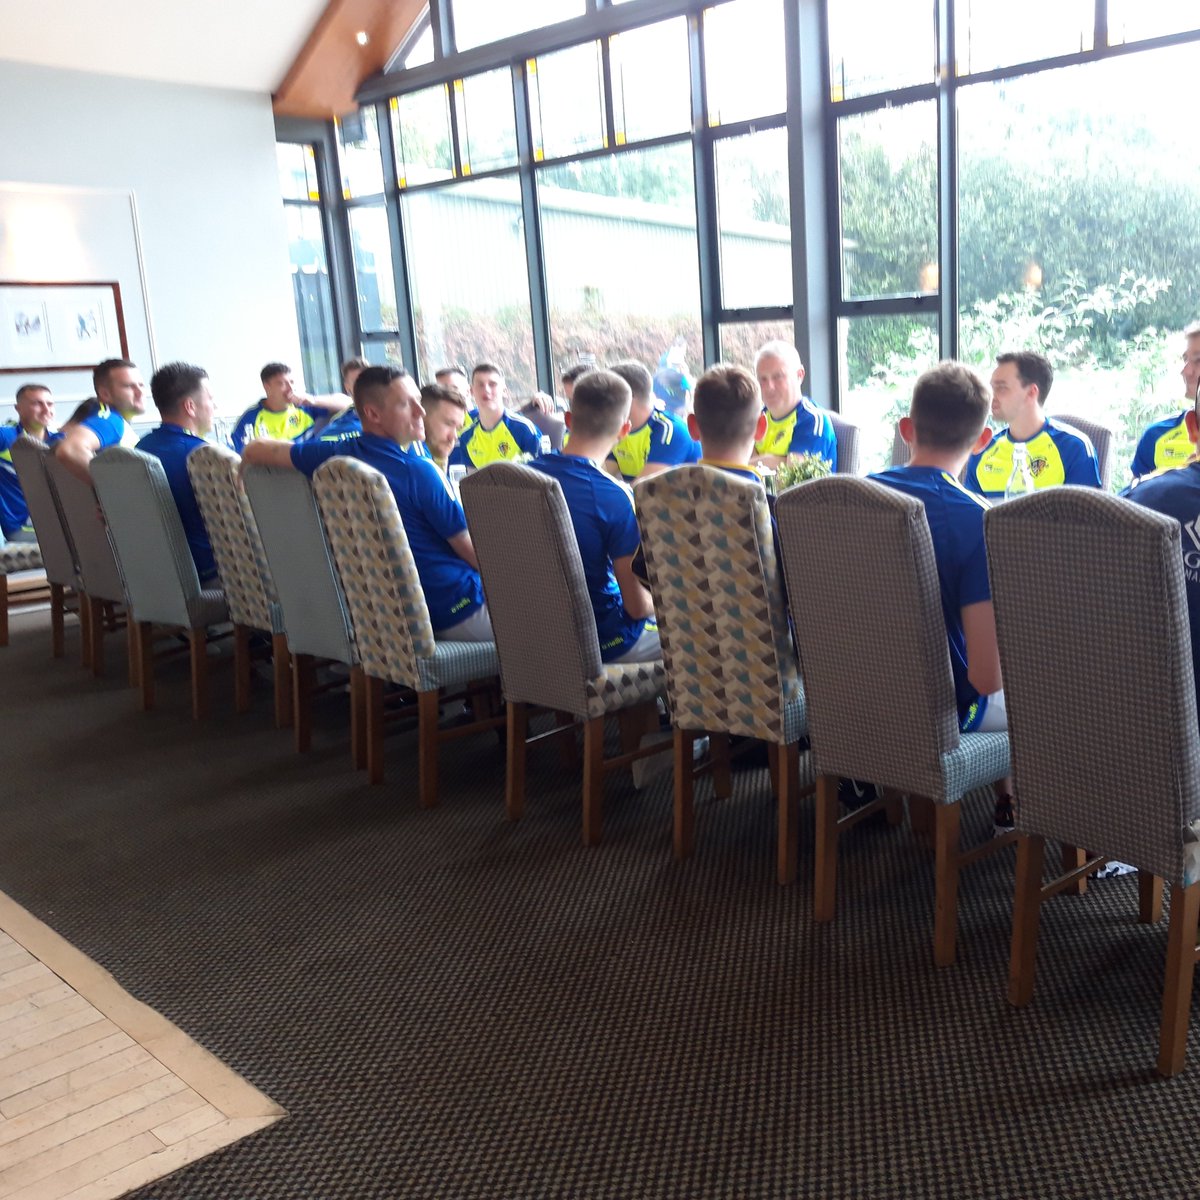 Pre match breakfast in @AthyGolfClub before the quarter final of the Lumsden Cup which we won 3 2 with goals from @CodyMulhall Stevie D and @coreyLammonmoor First time wearing our new training tops from our sponsors @SelectAccess. #Yaathemull 💙💛